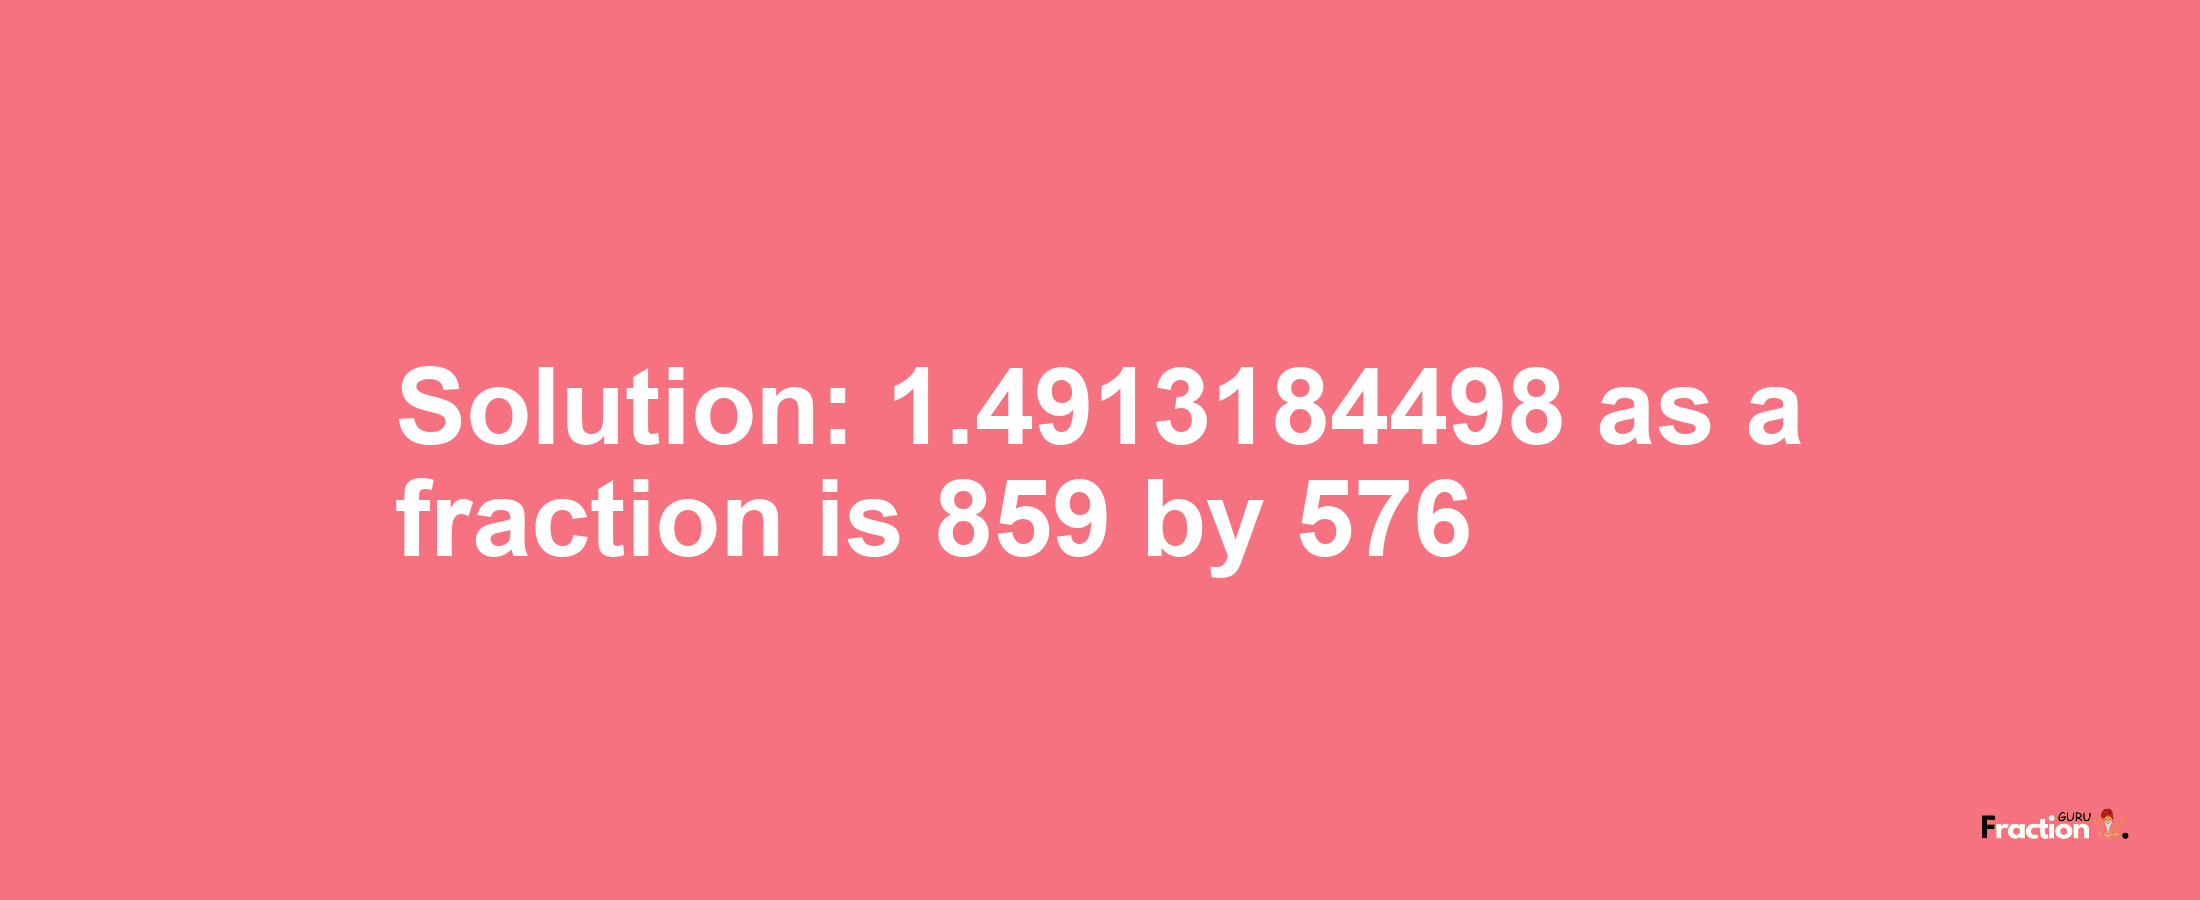 Solution:1.4913184498 as a fraction is 859/576